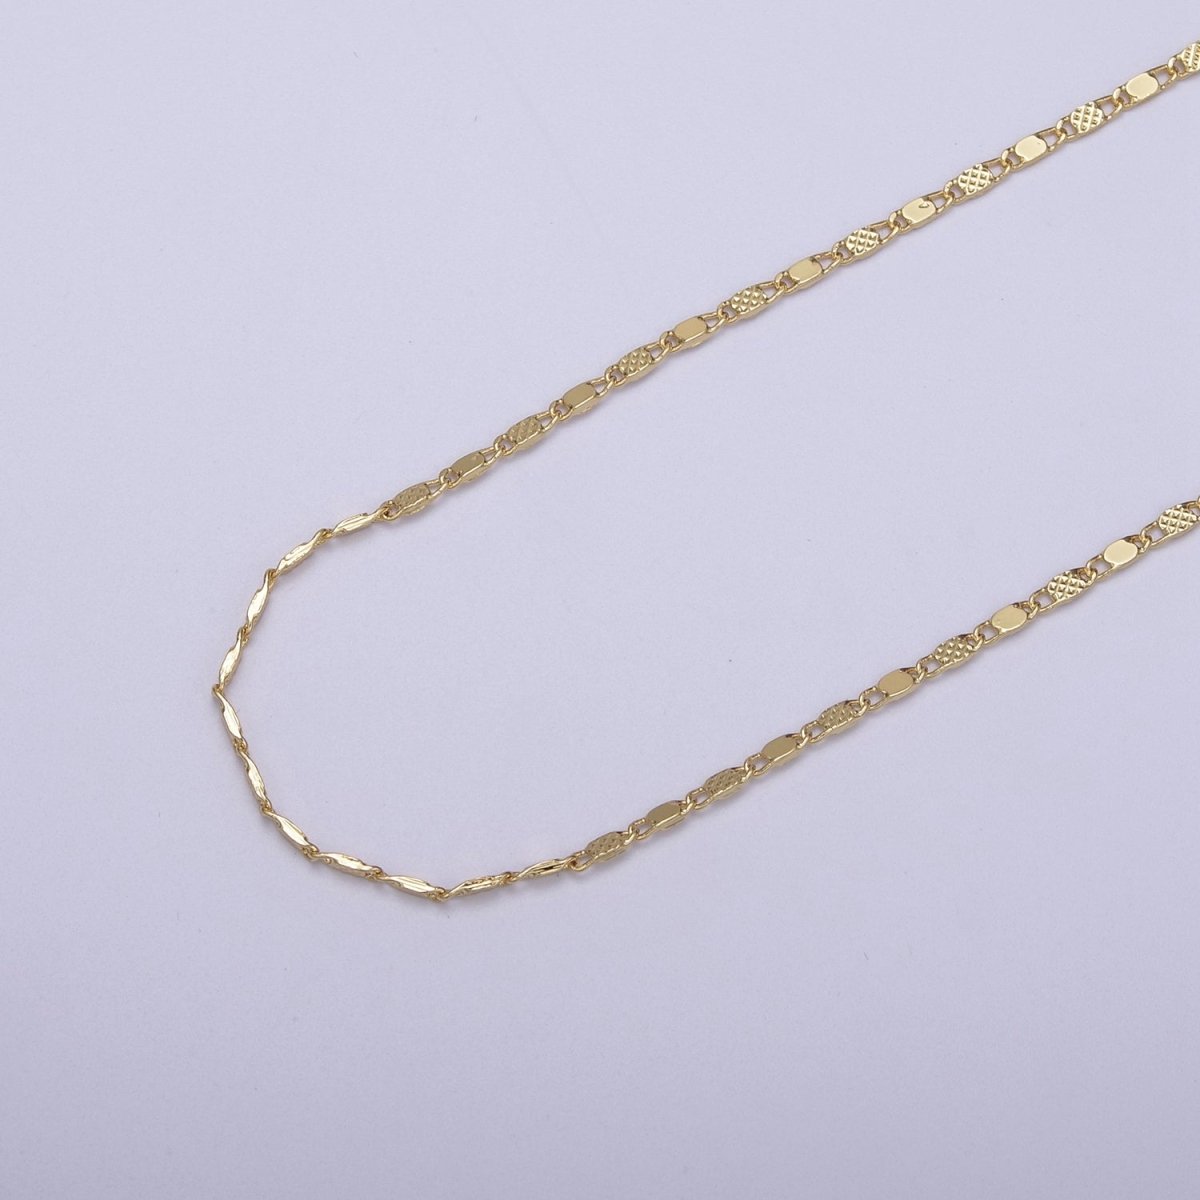 24K Gold Filled Sunburst Flat Bar Unique Chain by Yard, Dainty 1.7mm Wholesale Chain in Silver & Gold For Jewelry Making Supply Component| ROLL-638, ROLL-637 Clearance Pricing - DLUXCA